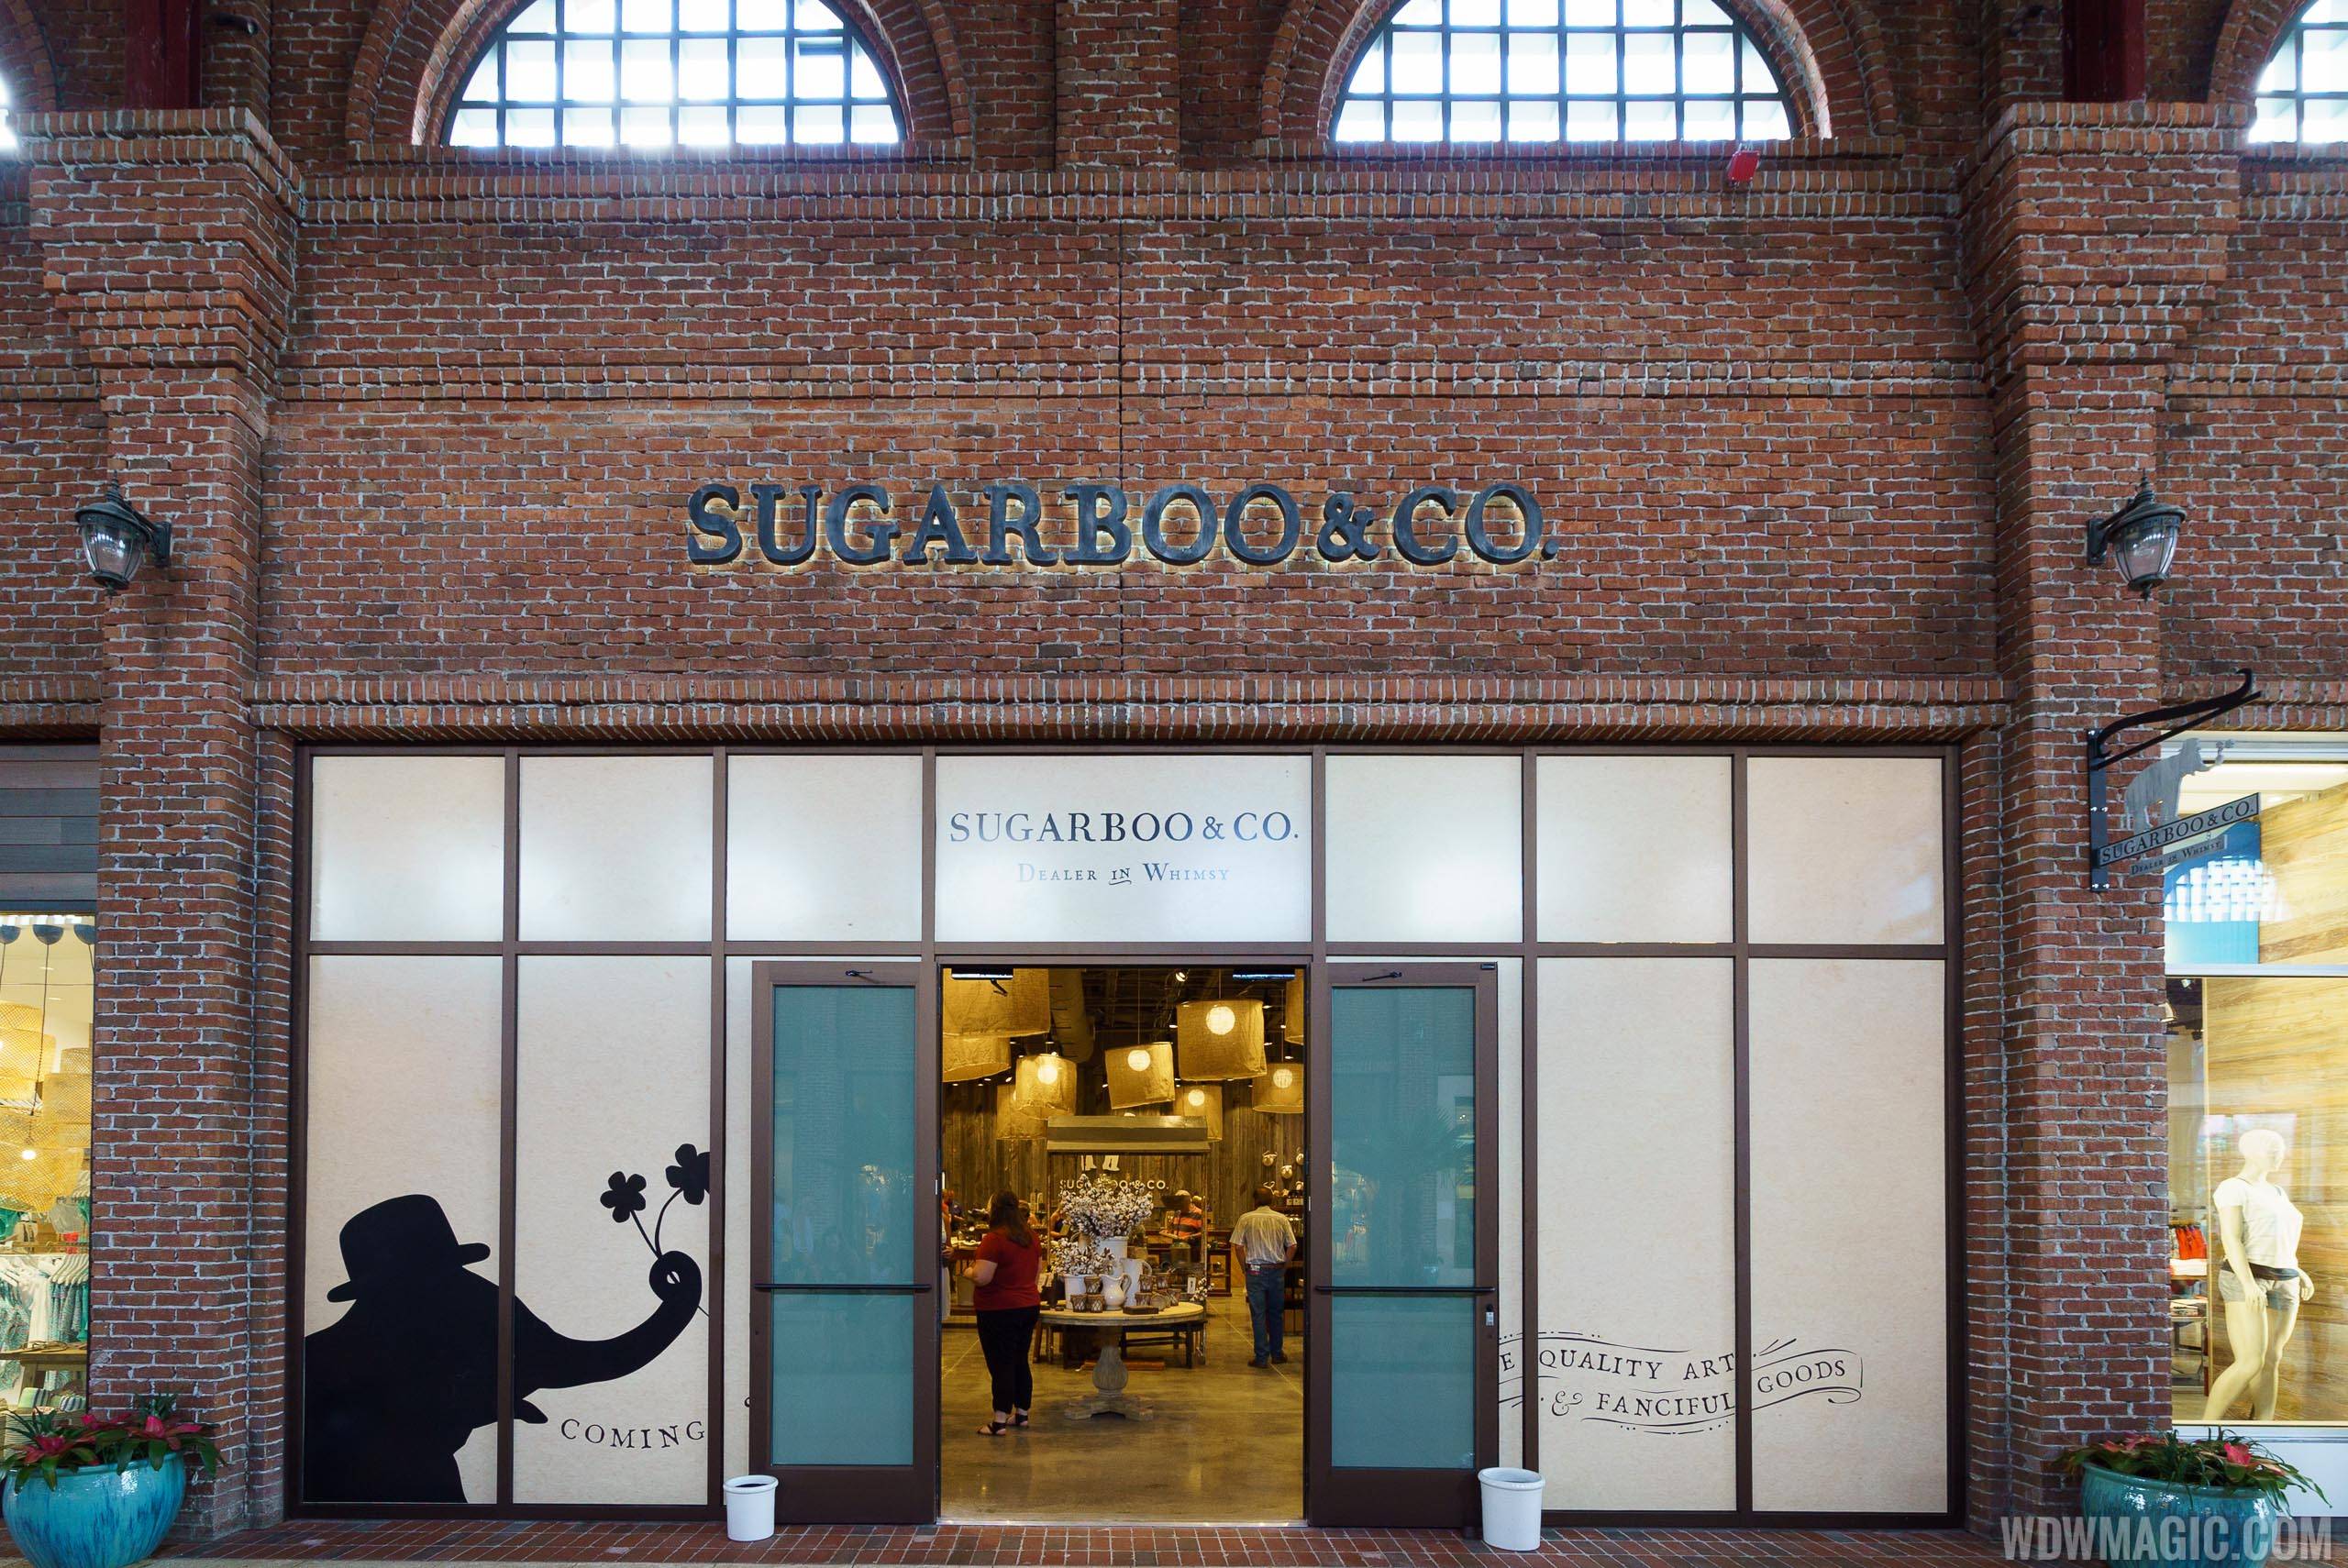 Sugarboo & Co. overview